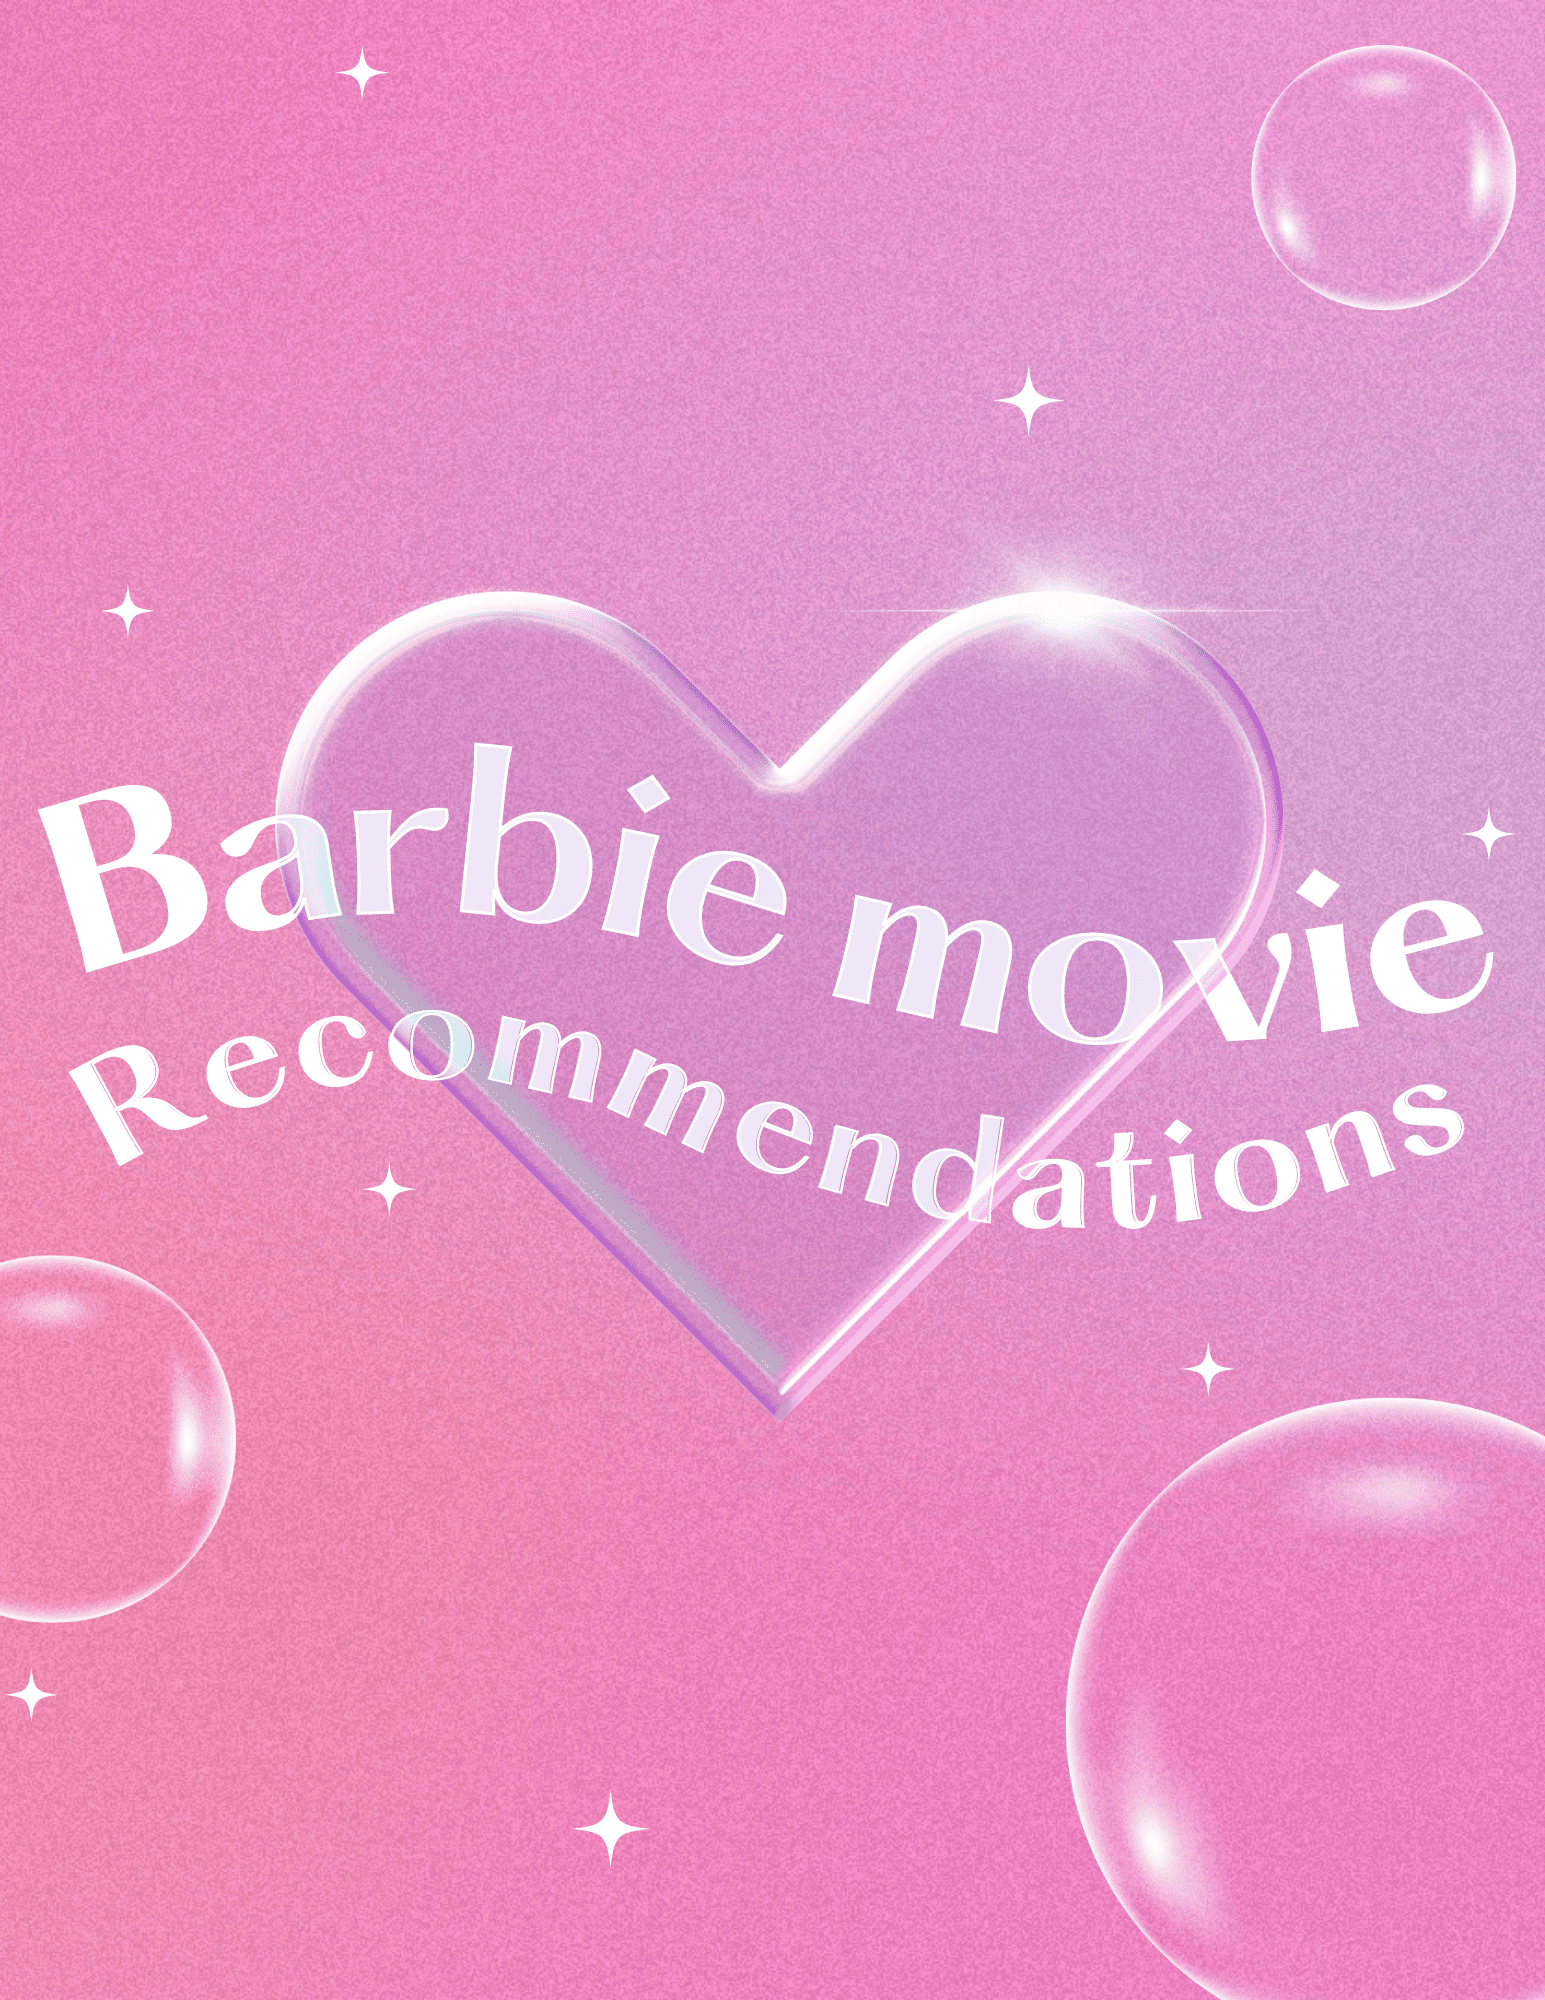 What to Read After Watching the Barbie Movie